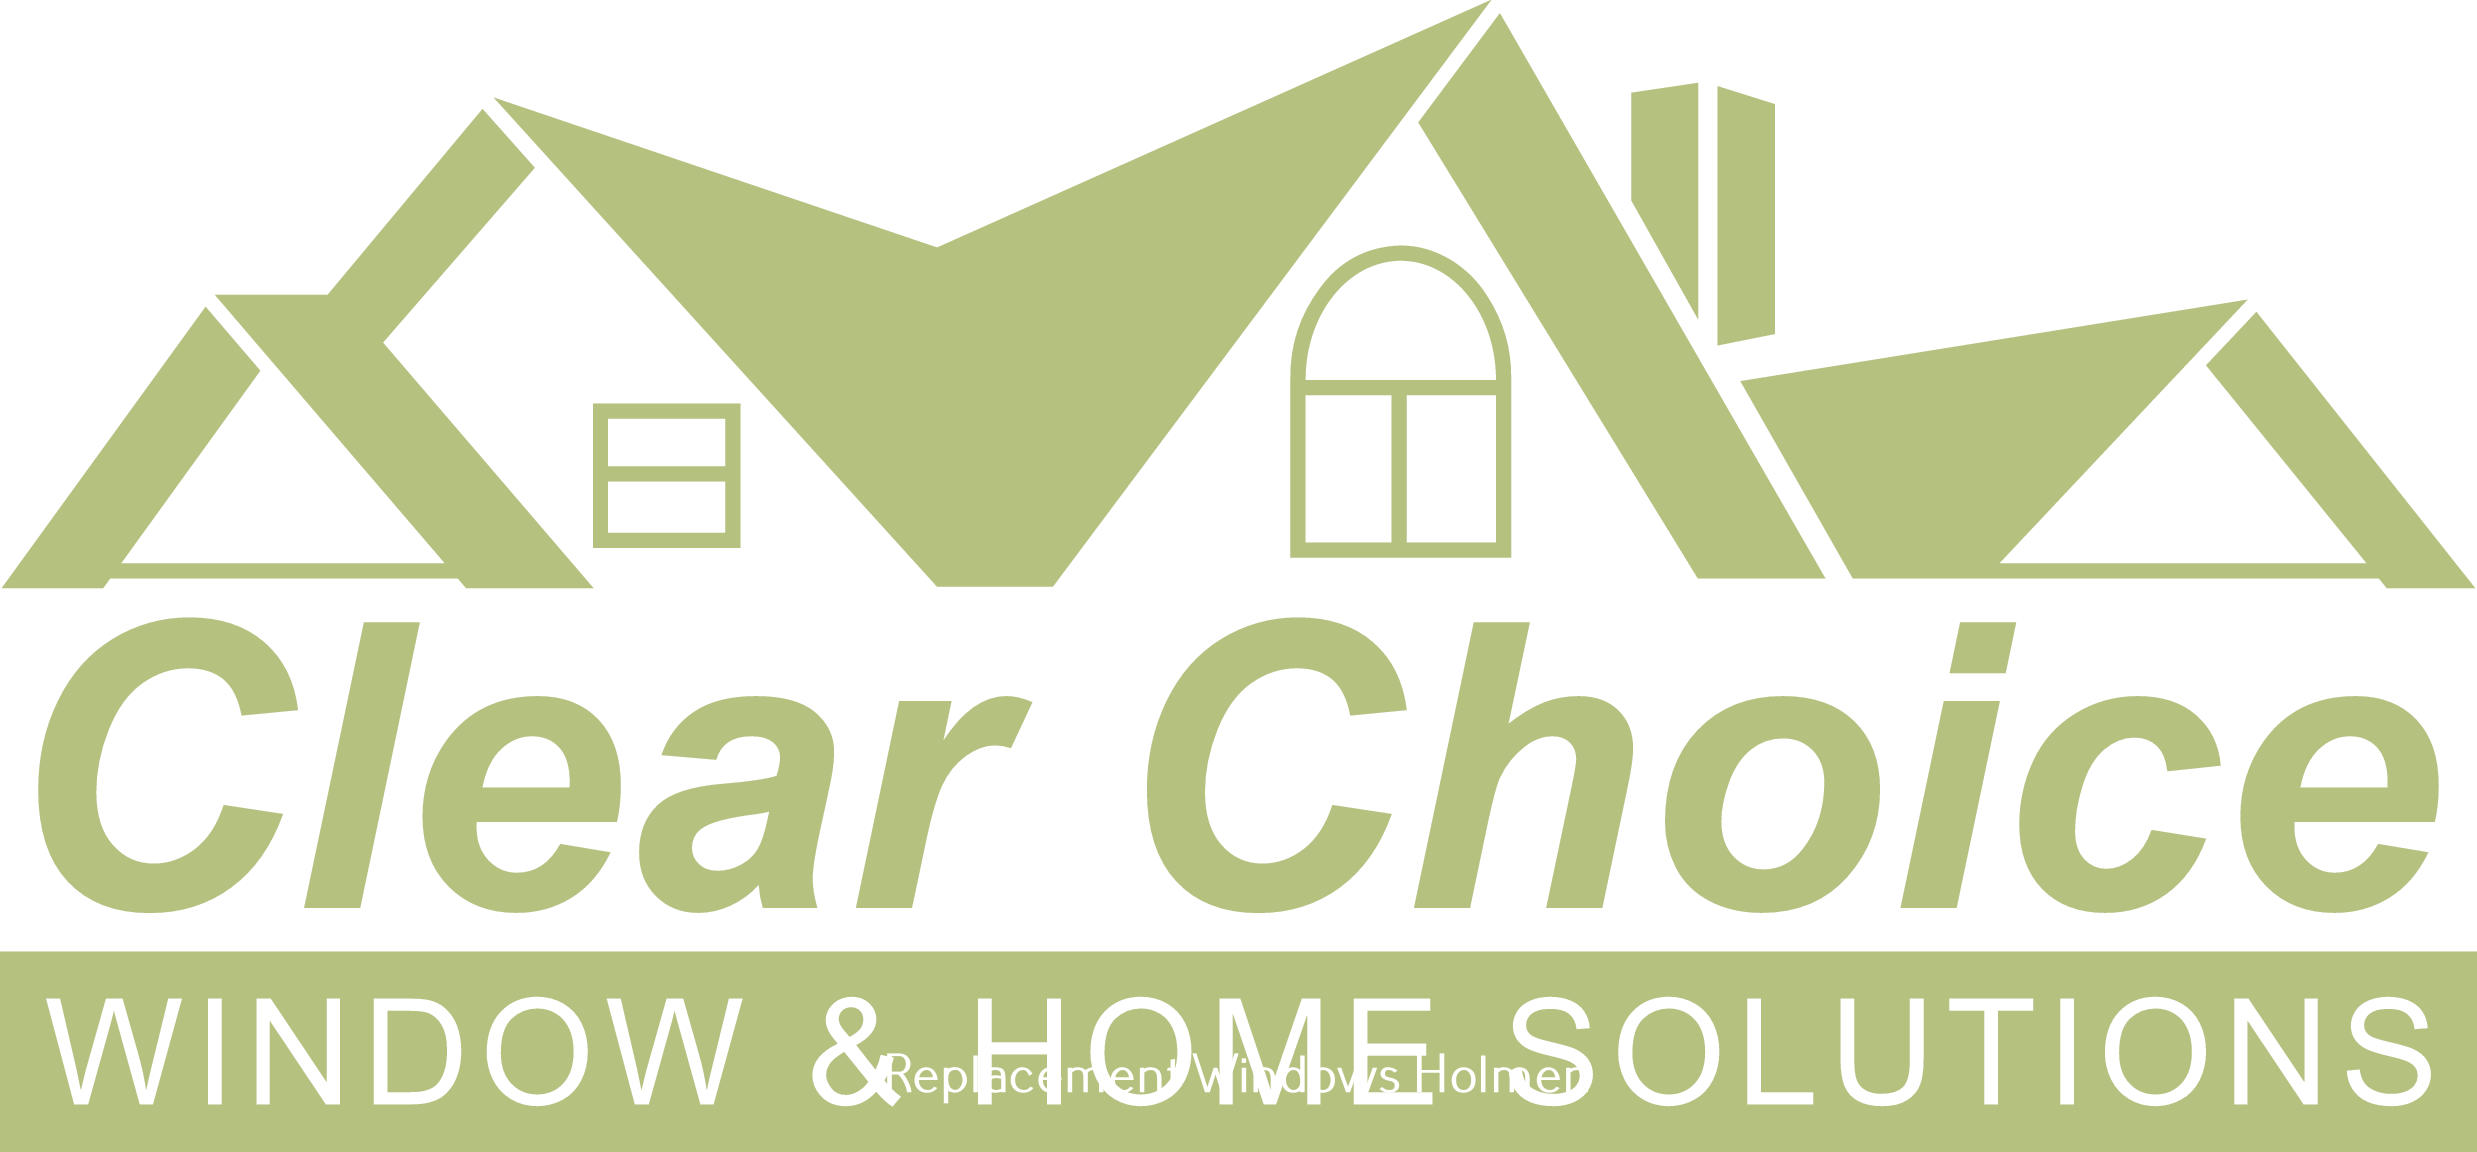 Clear Choice Window & Home Solutions Explains the Merits of Vinyl Windows in Window Replacement